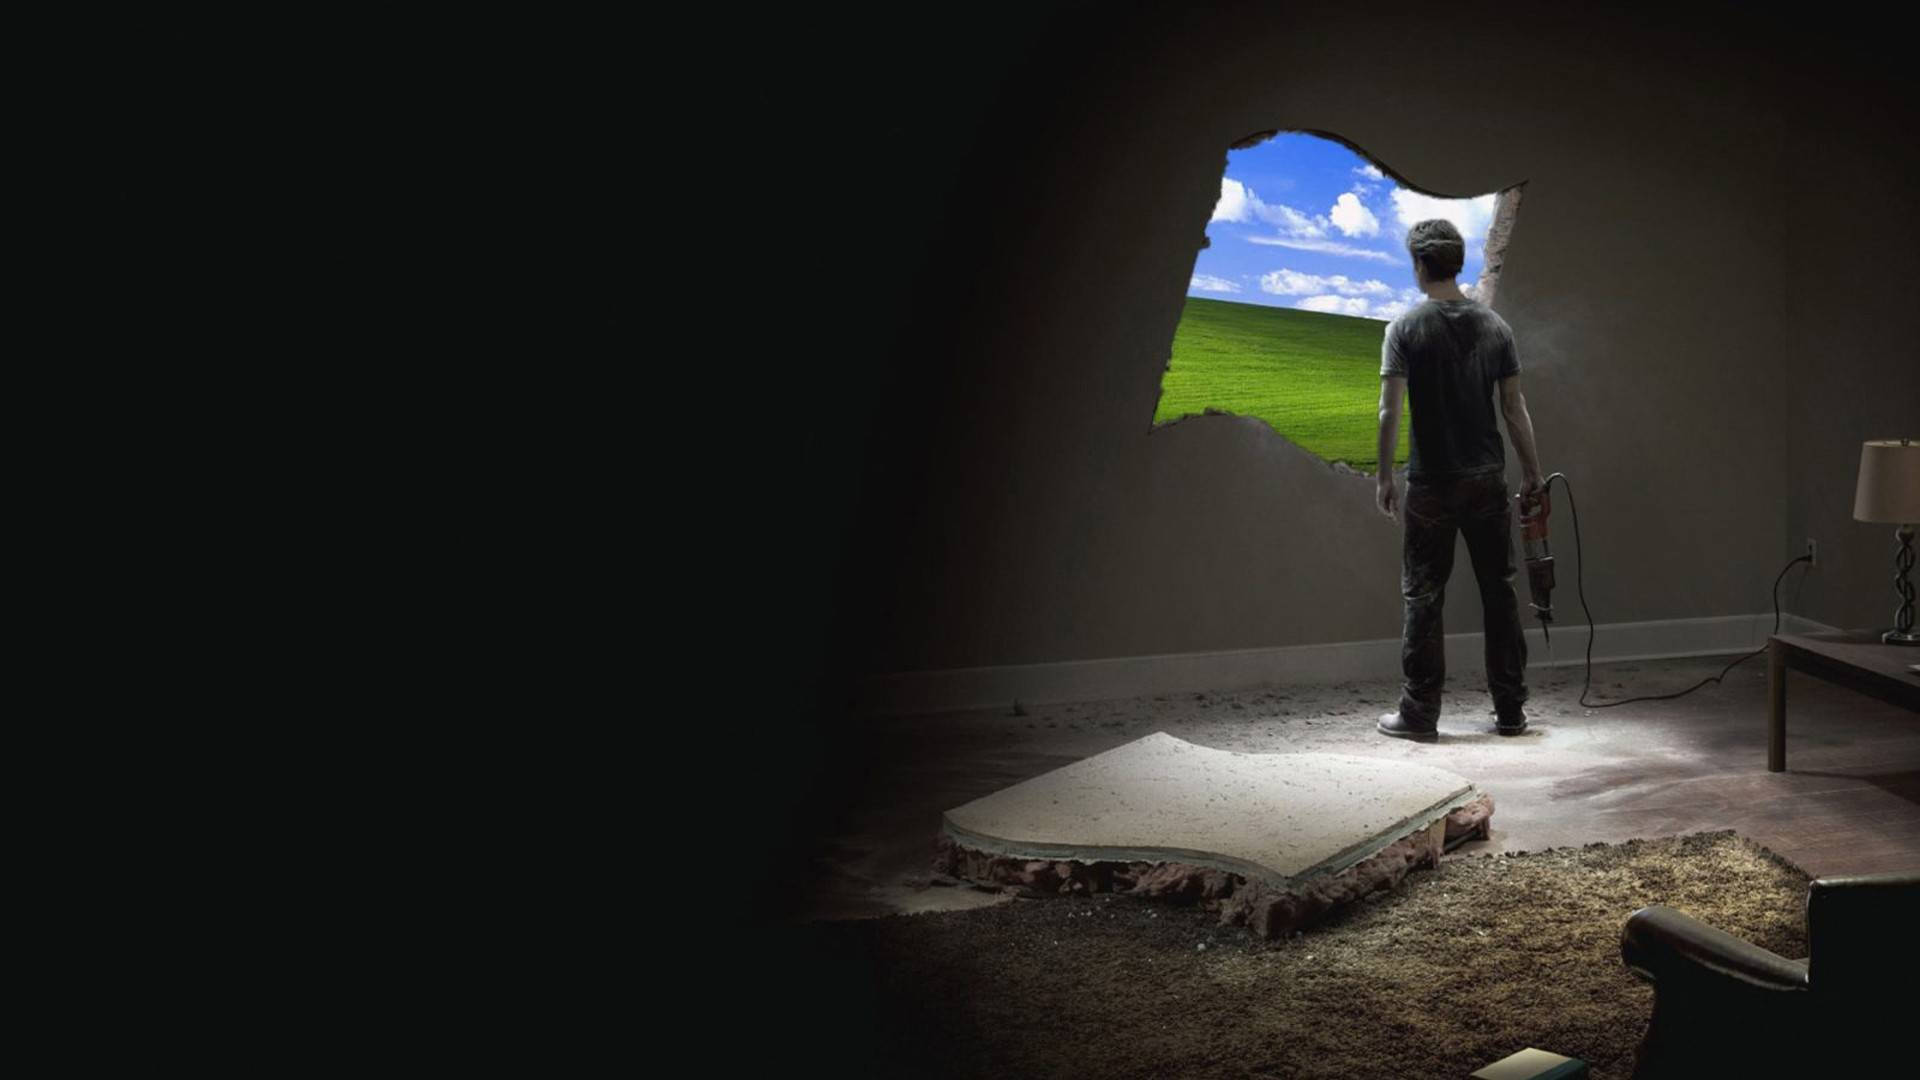 1920X1080 Windows Xp Wallpaper and Background